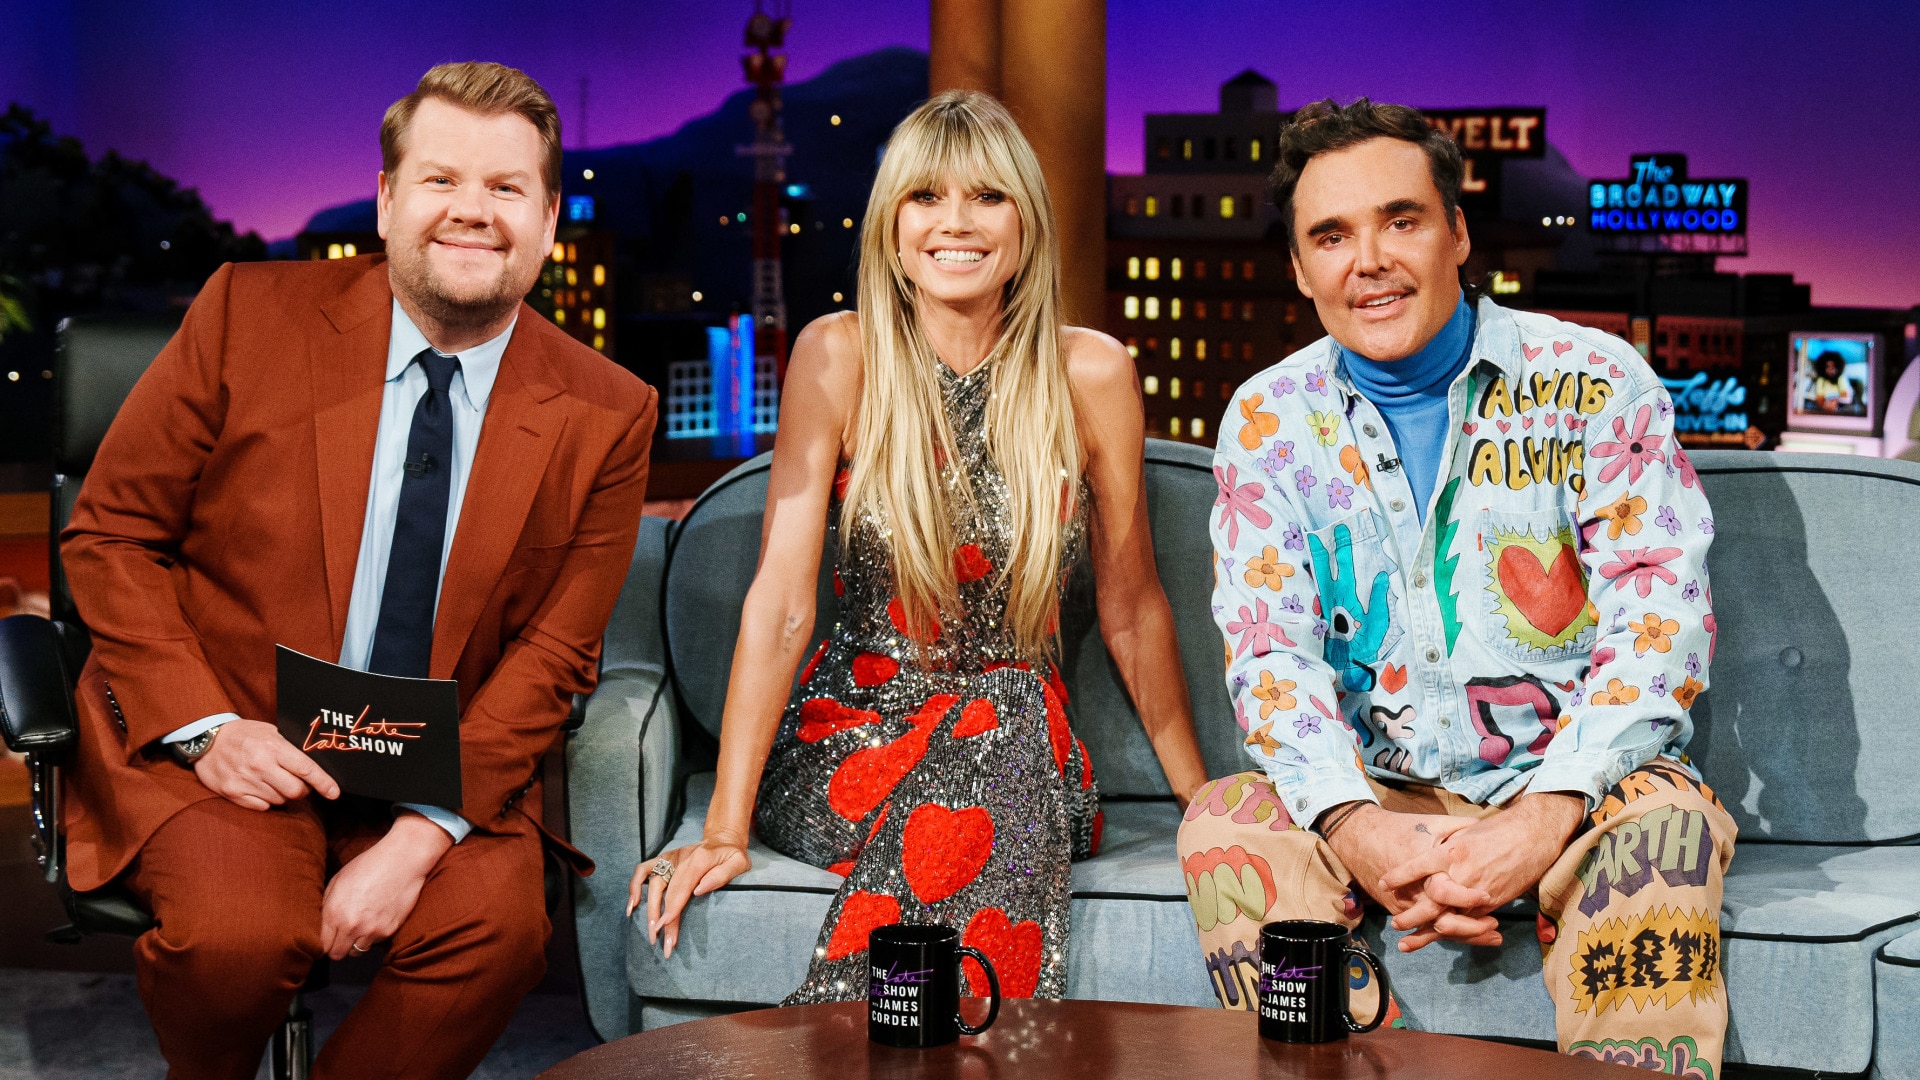 In Case You Missed It: Heidi Klum On ‘The Late Late Show With James Corden’